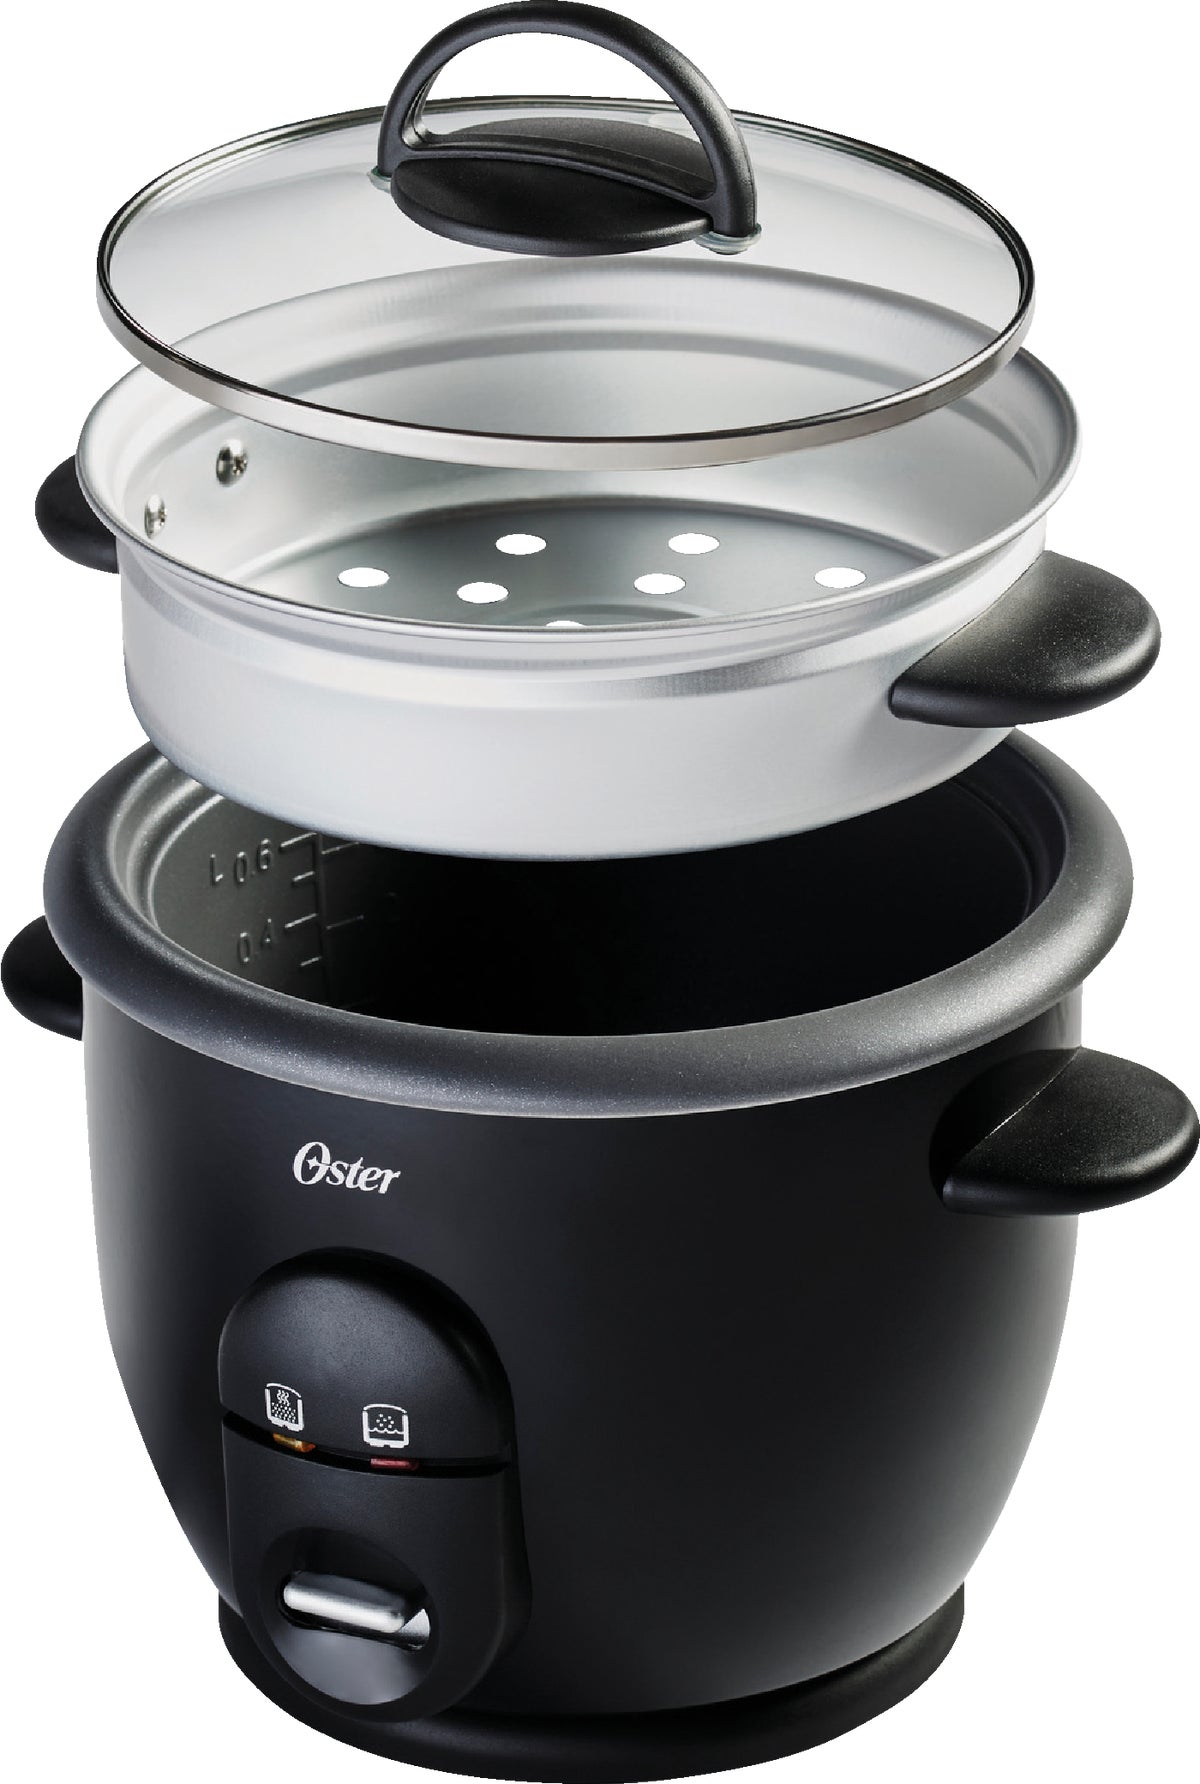 Rise by Dash Black Egg Cooker